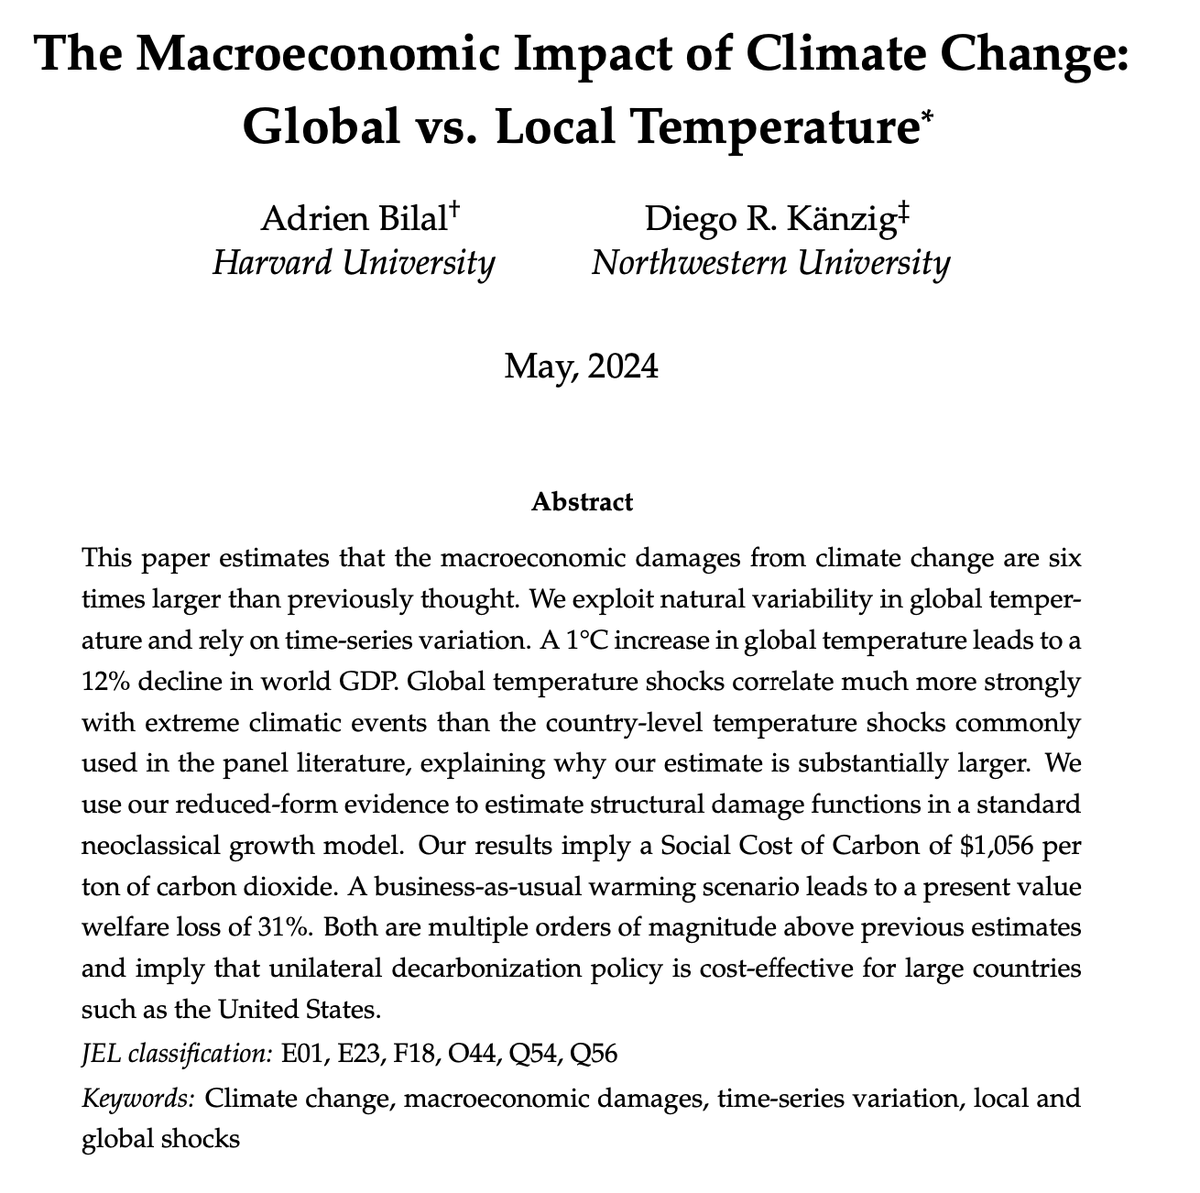 New paper with @drkaenzig showing that the Social Cost of Carbon is above $1,000/ton. Time series variation in global temperature implies 6x larger damages and more extreme events than panel variation in local/country-level temperature. shorturl.at/vxLO3